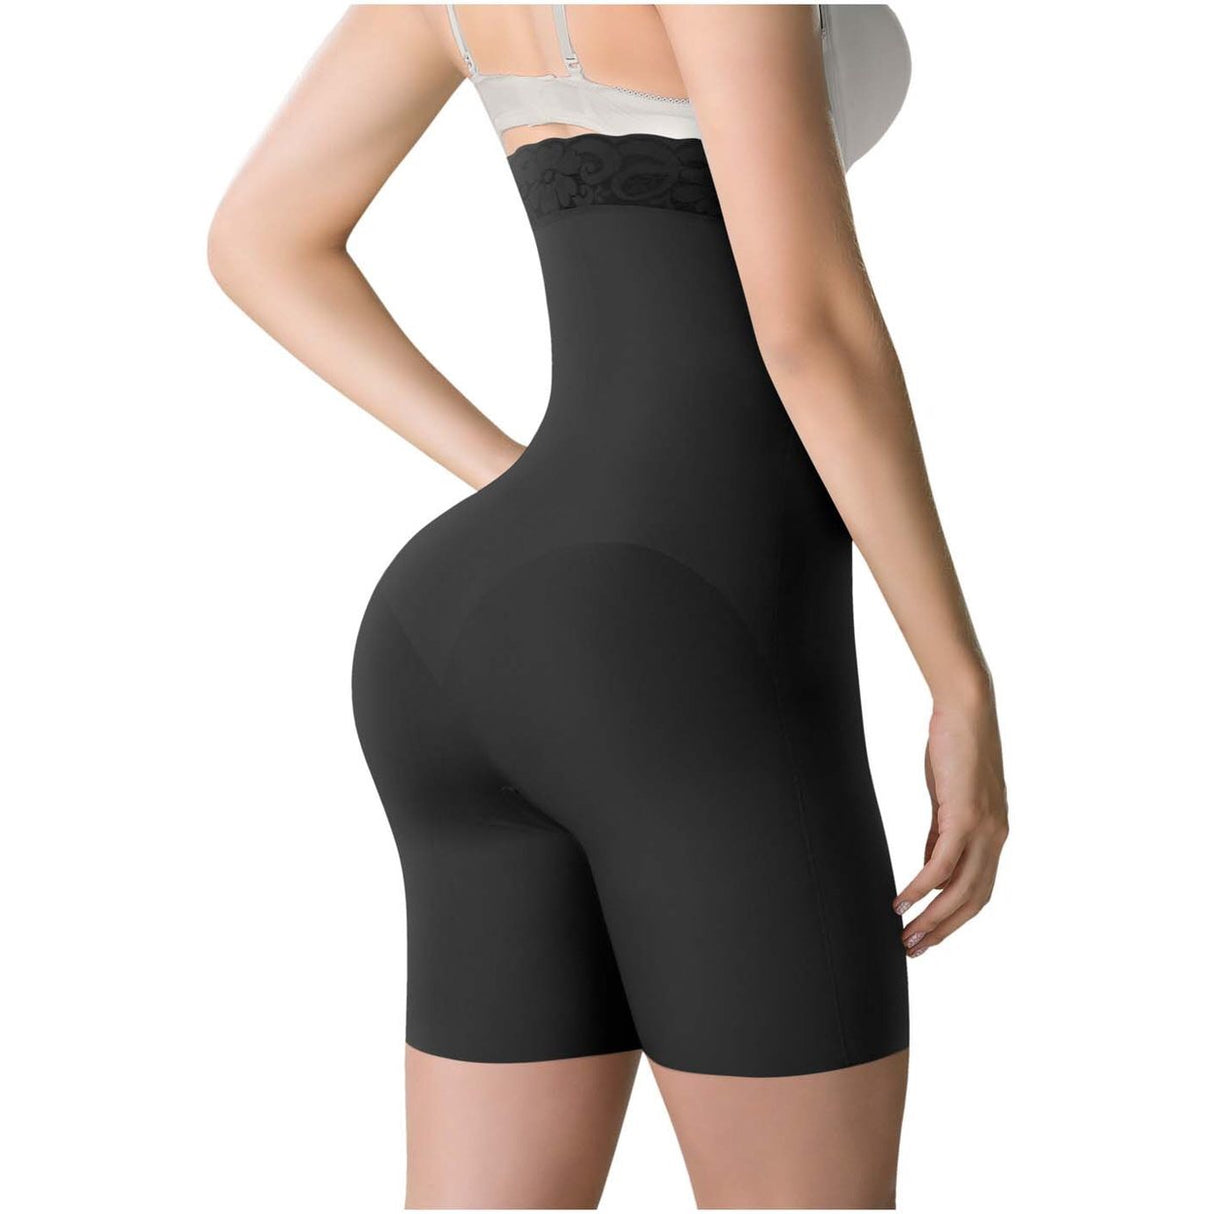 Strapless girdle  Shapes the waist and flattens the abdomen. – Fajas  Colombianas Sale